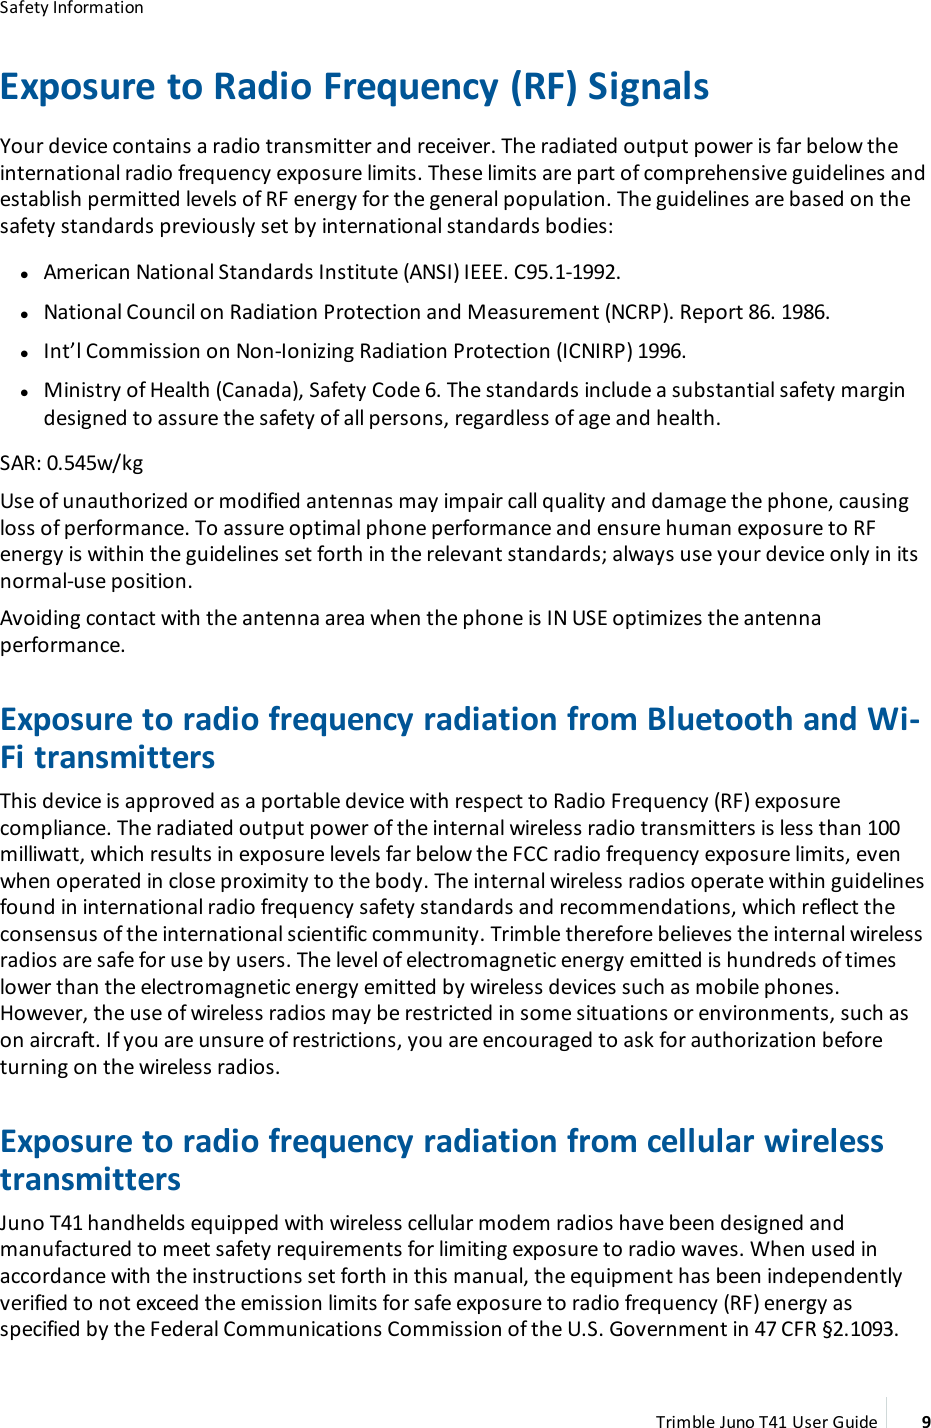 Safety InformationExposure to Radio Frequency (RF) SignalsYour device contains a radio transmitter and receiver. The radiated output power is far below theinternational radio frequency exposure limits. These limits are part of comprehensive guidelines andestablish permitted levels of RF energy for the general population. The guidelines are based on thesafety standards previously set by international standards bodies:lAmerican National Standards Institute (ANSI) IEEE. C95.1-1992.lNational Council on Radiation Protection and Measurement (NCRP). Report 86. 1986.lInt’l Commission on Non-Ionizing Radiation Protection (ICNIRP) 1996.lMinistry of Health (Canada), Safety Code 6. The standards include a substantial safety margindesigned to assure the safety of all persons, regardless of age and health.SAR: 0.545w/kgUse of unauthorized or modified antennas may impair call quality and damage the phone, causingloss of performance. To assure optimal phone performance and ensure human exposure to RFenergy is within the guidelines set forth in the relevant standards; always use your device only in itsnormal-use position.Avoiding contact with the antenna area when the phone is IN USE optimizes the antennaperformance.Exposure to radio frequency radiation from Bluetooth and Wi-Fi transmittersThis device is approved as a portable device with respect to Radio Frequency (RF) exposurecompliance. The radiated output power of the internal wireless radio transmitters is less than 100milliwatt, which results in exposure levels far below the FCC radio frequency exposure limits, evenwhen operated in close proximity to the body. The internal wireless radios operate within guidelinesfound in international radio frequency safety standards and recommendations, which reflect theconsensus of the international scientific community. Trimble therefore believes the internal wirelessradios are safe for use by users. The level of electromagnetic energy emitted is hundreds of timeslower than the electromagnetic energy emitted by wireless devices such as mobile phones.However, the use of wireless radios may be restricted in some situations or environments, such ason aircraft. If you are unsure of restrictions, you are encouraged to ask for authorization beforeturning on the wireless radios.Exposure to radio frequency radiation from cellular wirelesstransmittersJuno T41 handhelds equipped with wireless cellular modem radios have been designed andmanufactured to meet safety requirements for limiting exposure to radio waves. When used inaccordance with the instructions set forth in this manual, the equipment has been independentlyverified to not exceed the emission limits for safe exposure to radio frequency (RF) energy asspecified by the Federal Communications Commission of the U.S. Government in 47 CFR §2.1093.Trimble Juno T41 User Guide 9